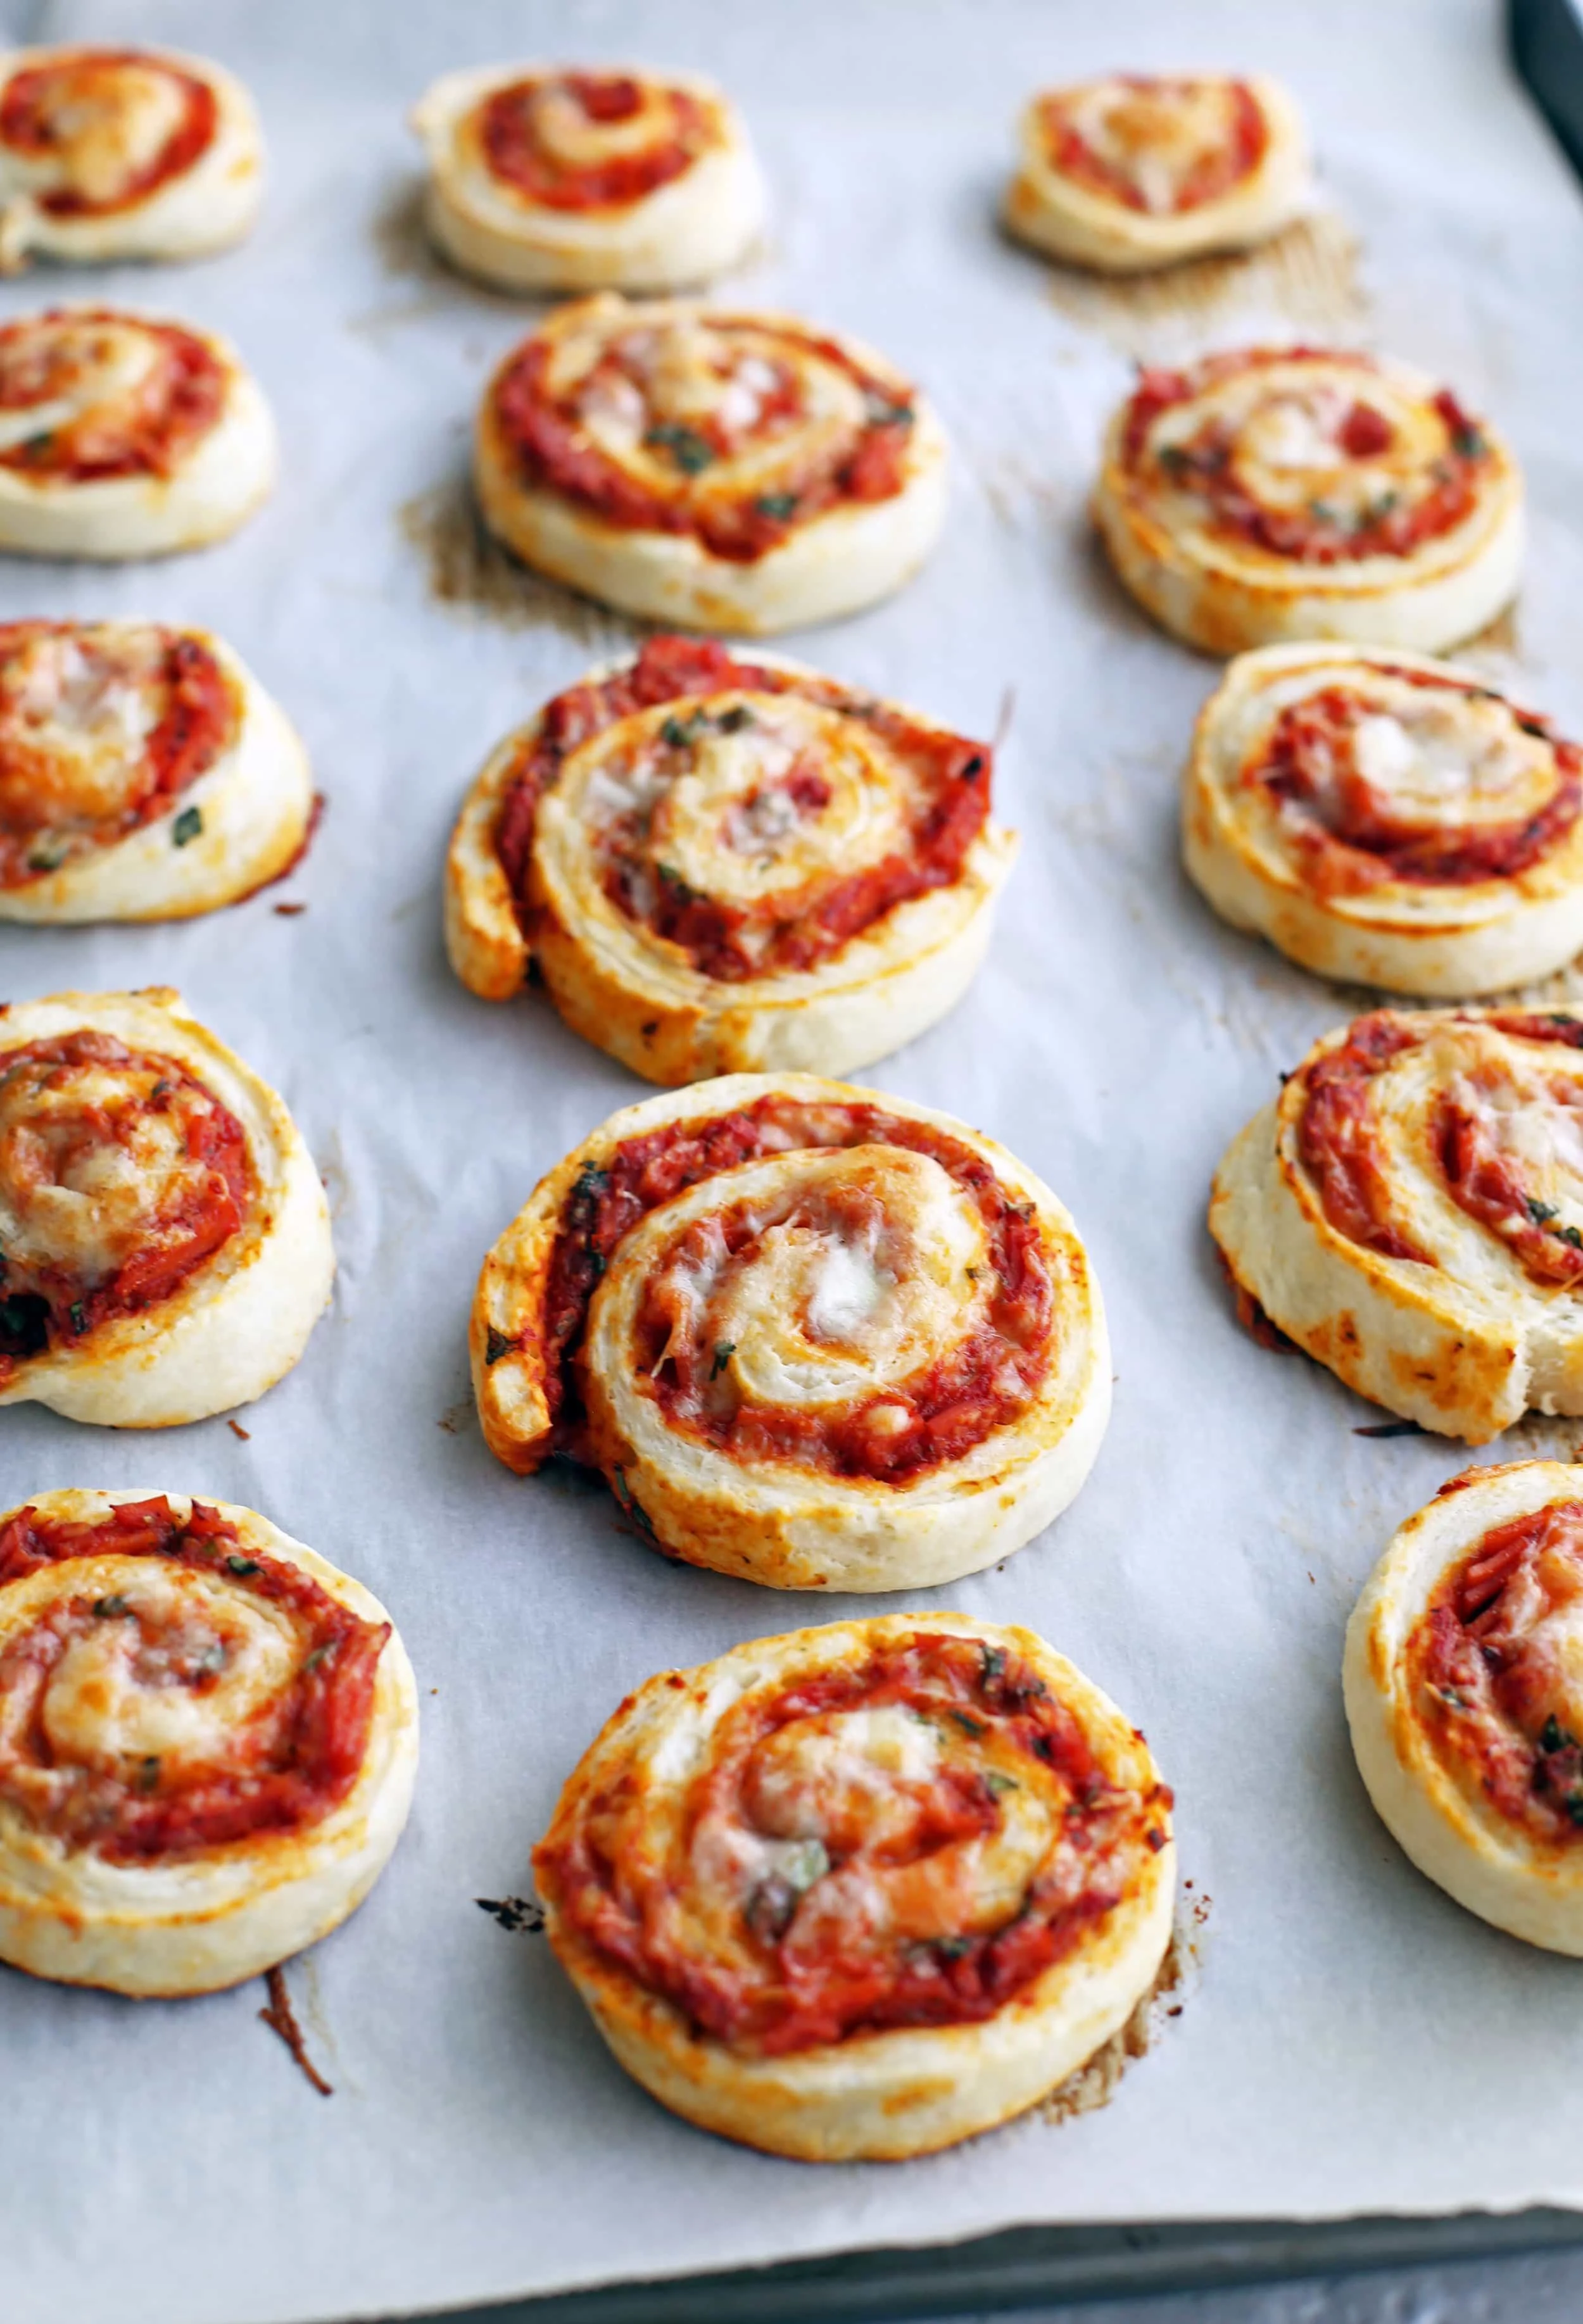 Freshly baked pepperoni cheese pizza rolls on a parchment paper lined baking sheet.